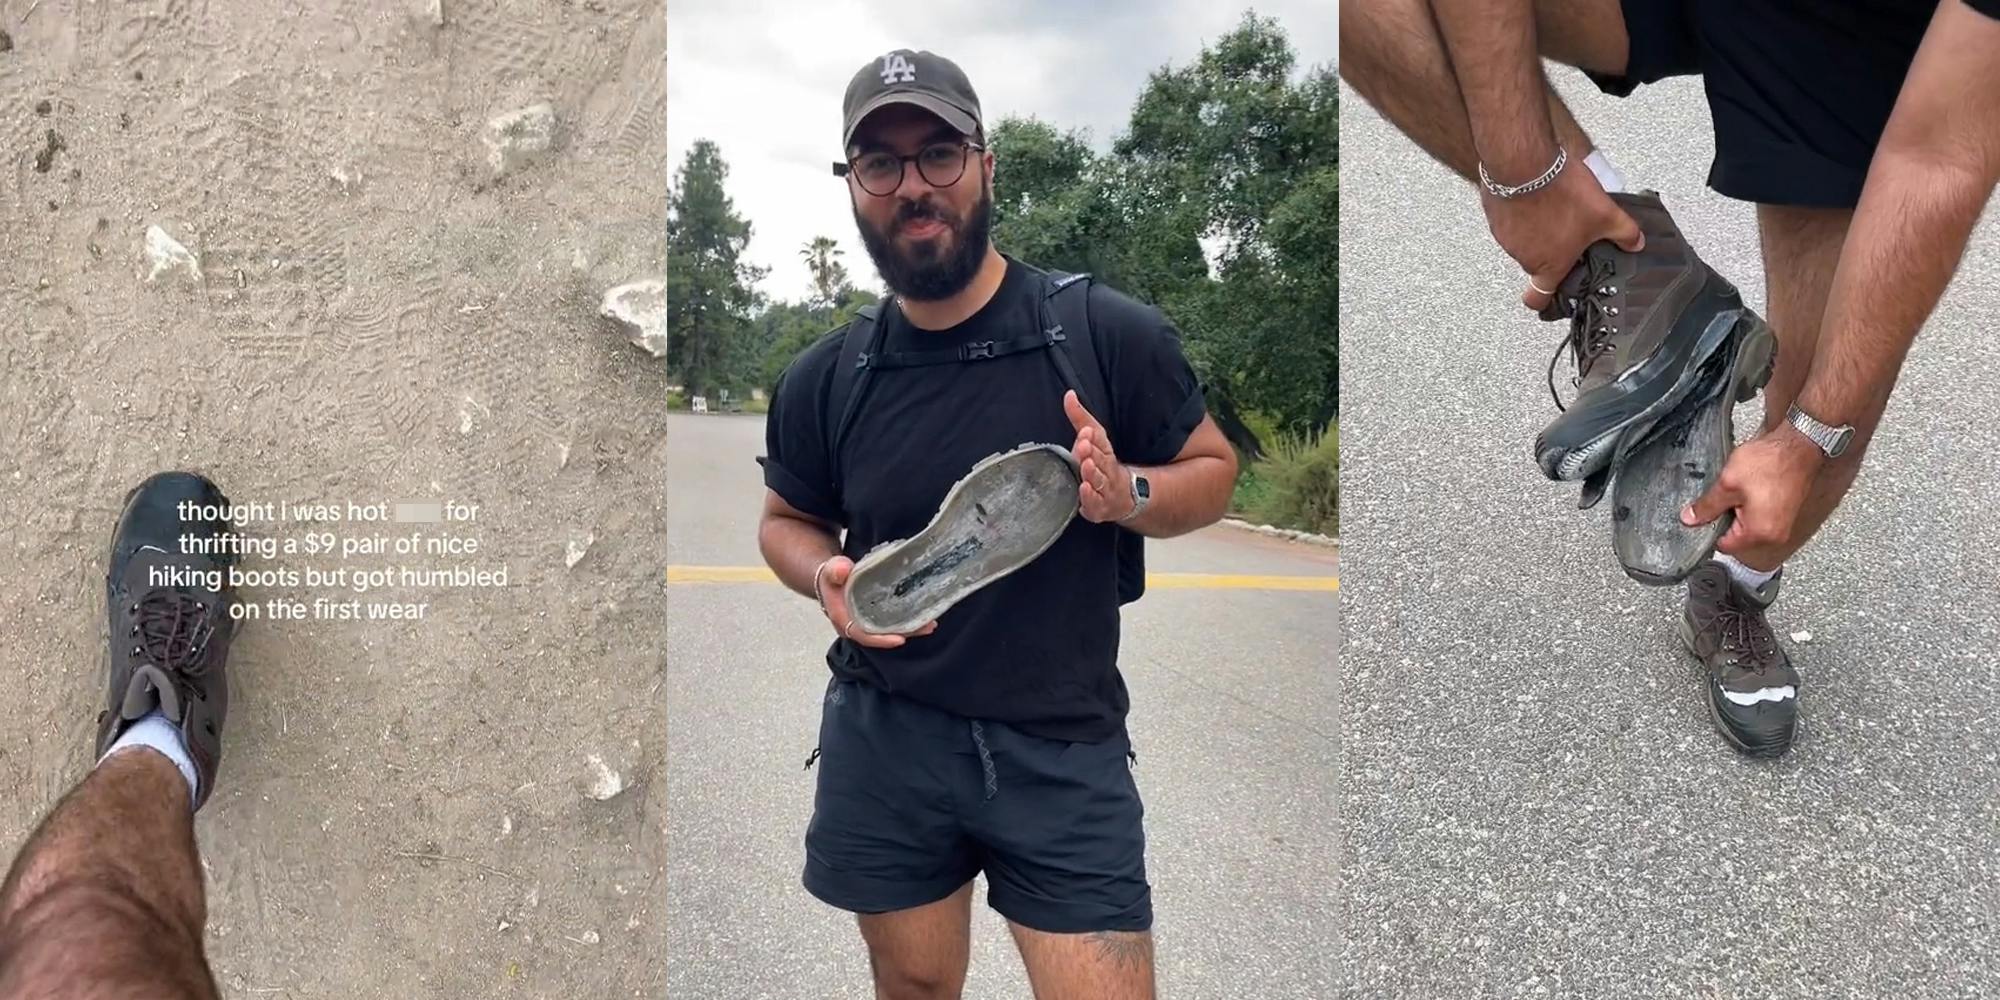 hiker walking with caption "thought I was hot blank for thrifting a $9 pair of nice hiking boots but got humbled on the first wear" (l) hiker holding up broken boot (c) hiker showing hiking boots falling apart (r)